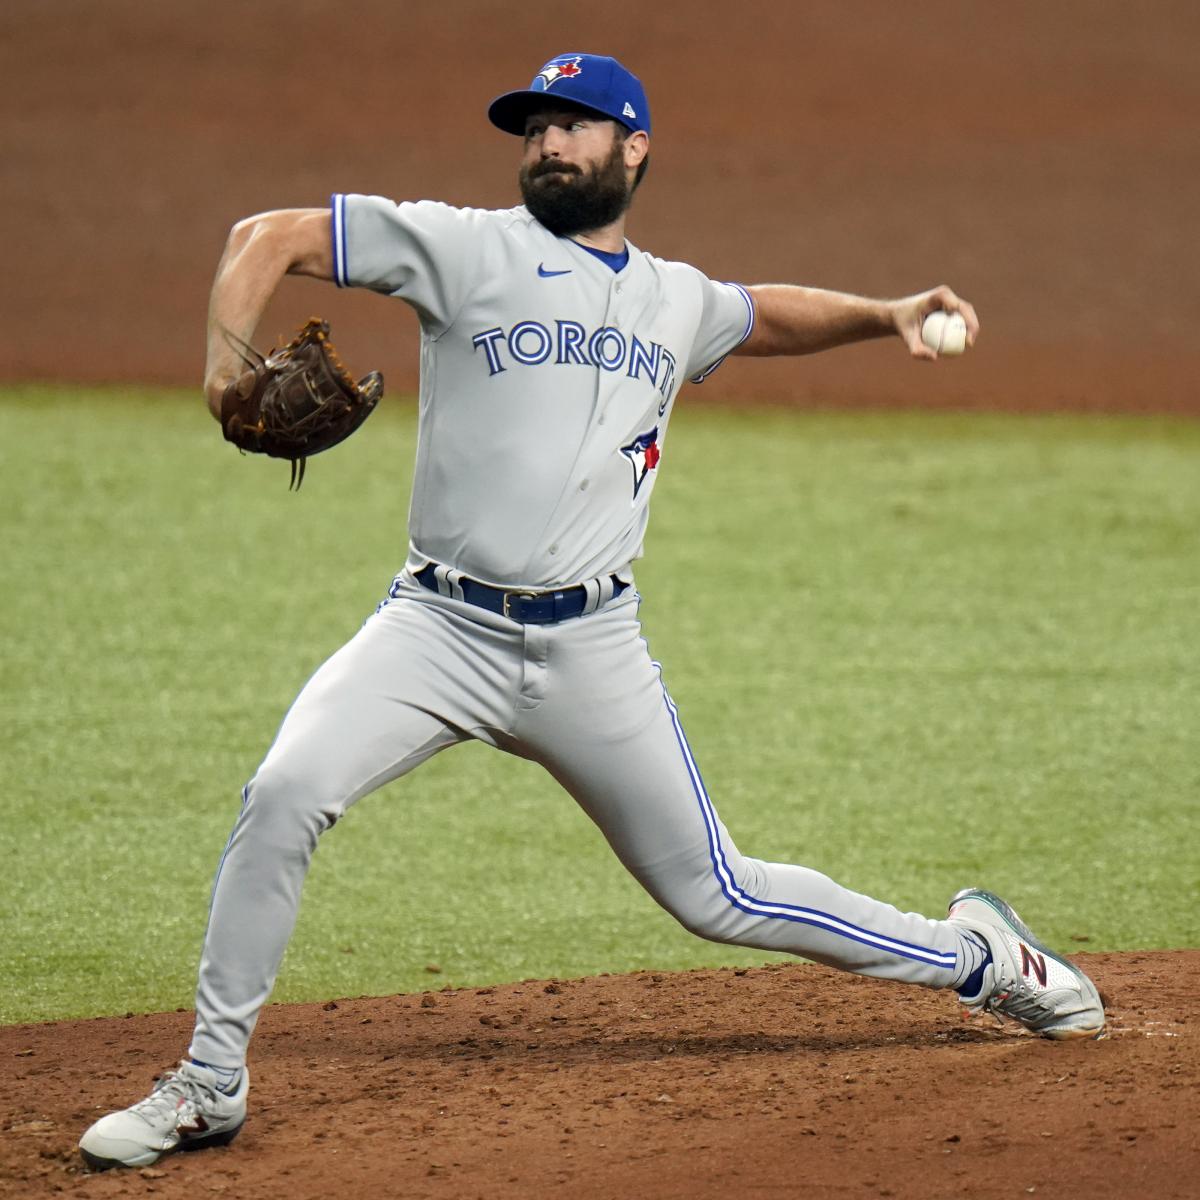 Robbie Ray takes no-hitter into 7th, Blue Jays end Tampa Bay's 6